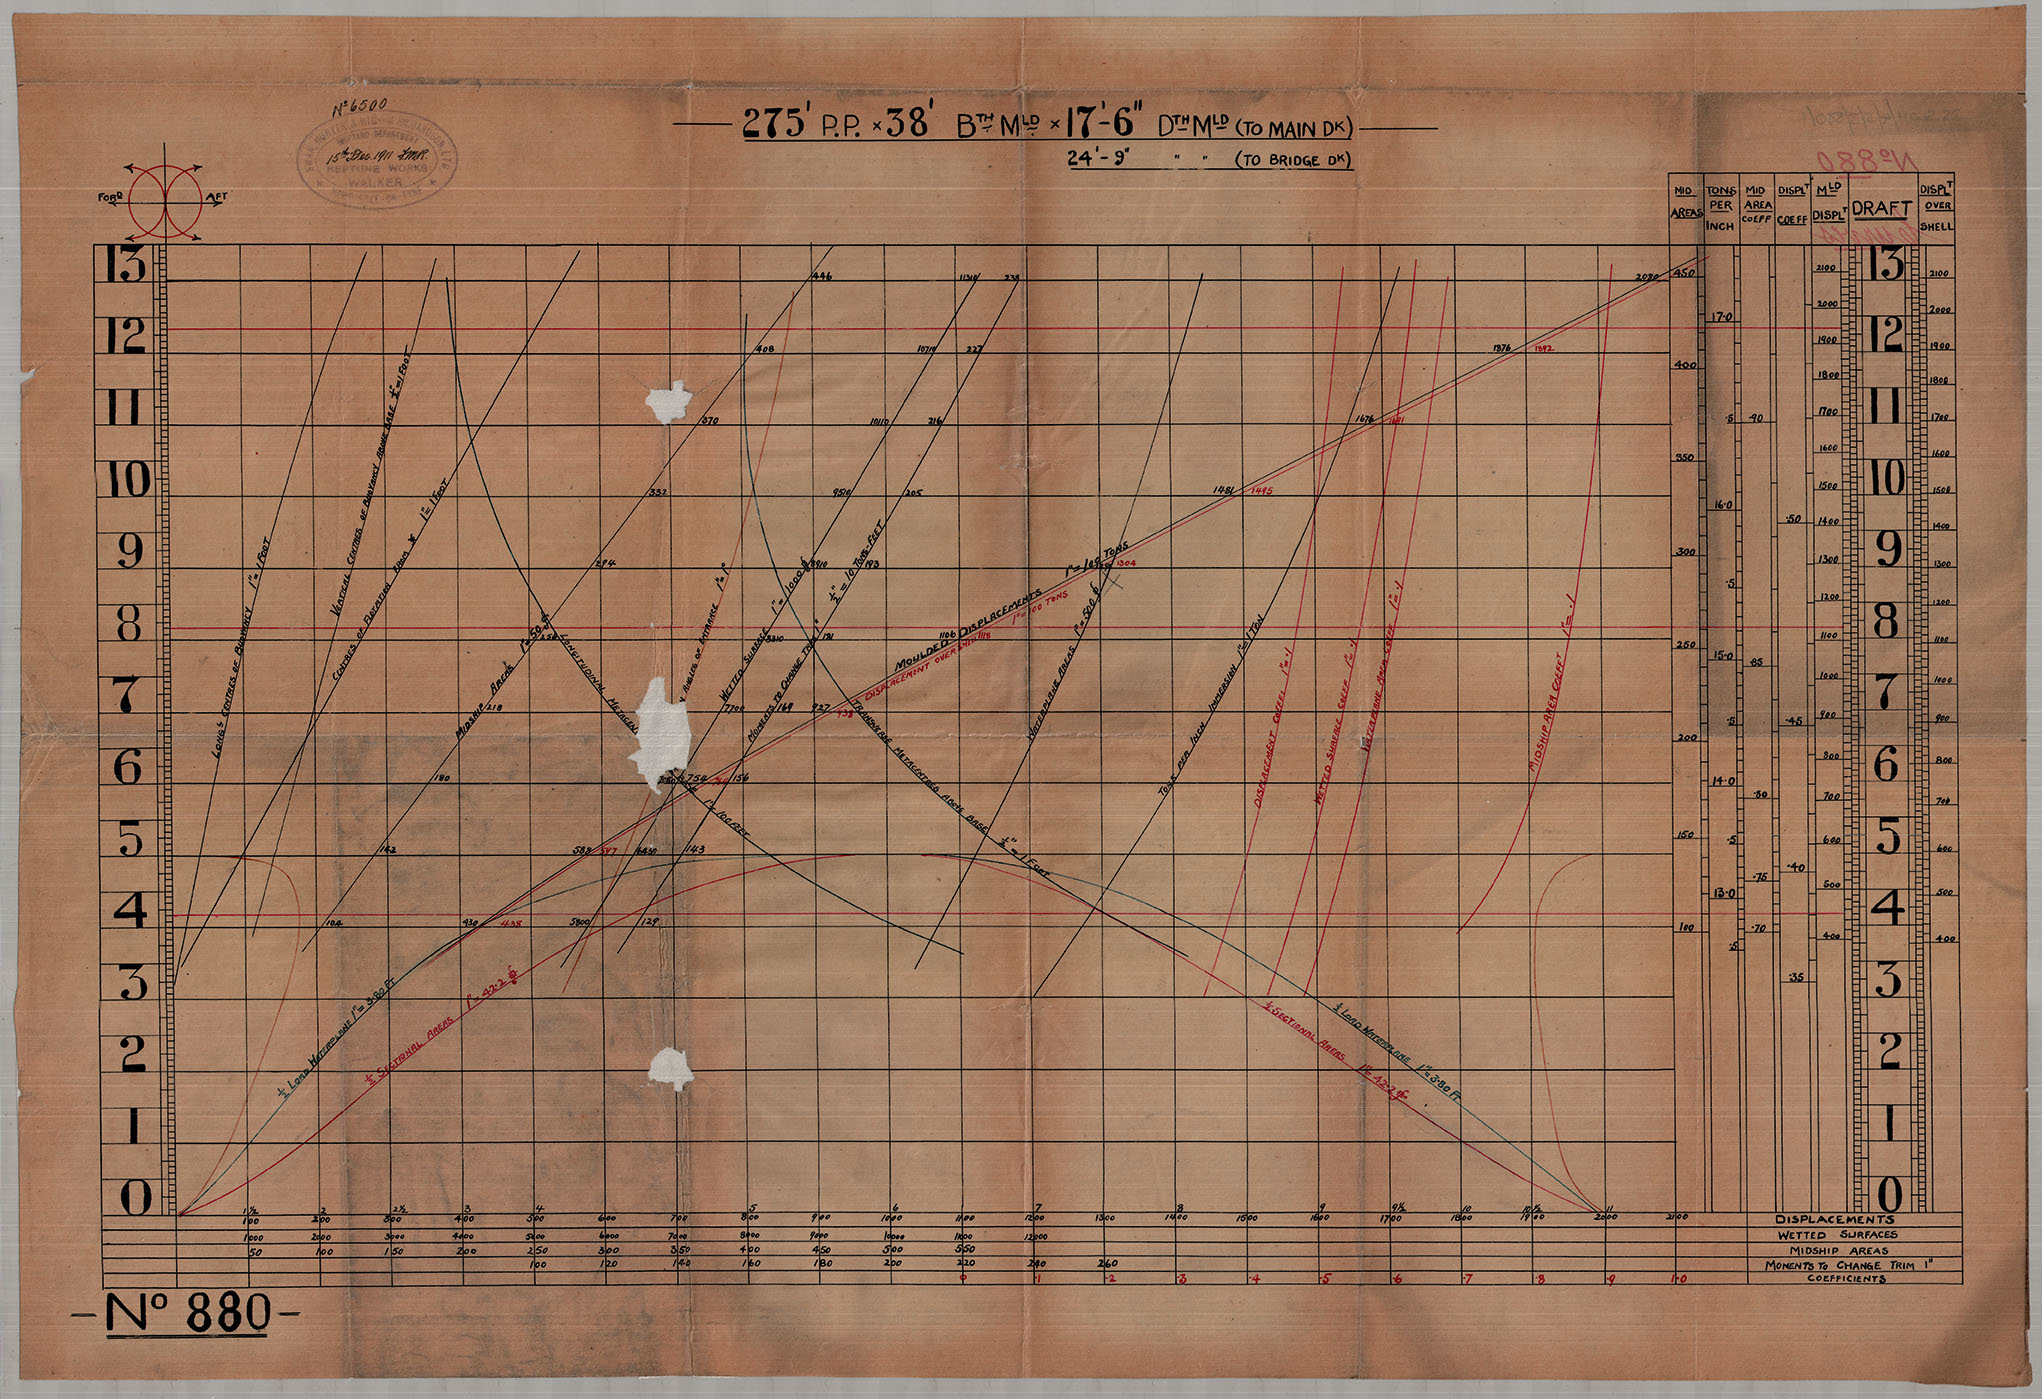 SS Panay /Tss Waterford displacement curve